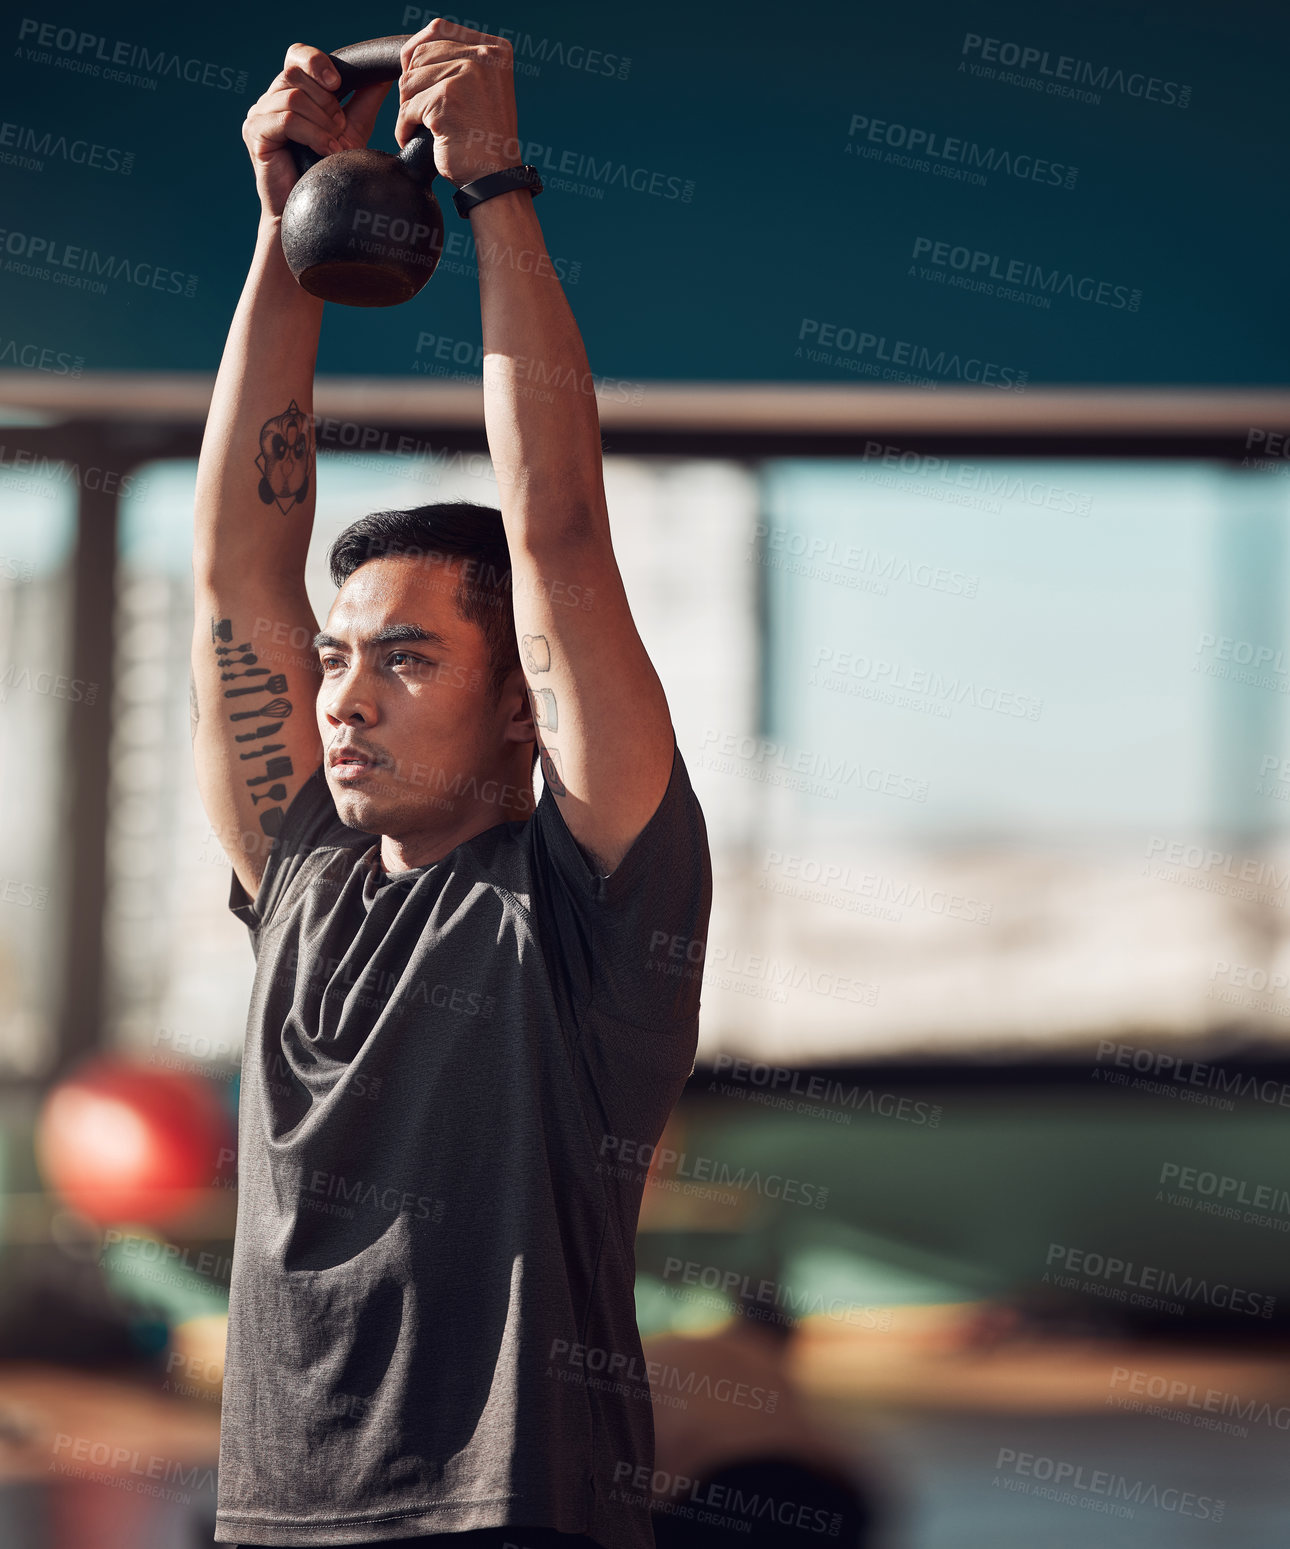 Buy stock photo Shot of a young man working out using a kettlebell in the gym